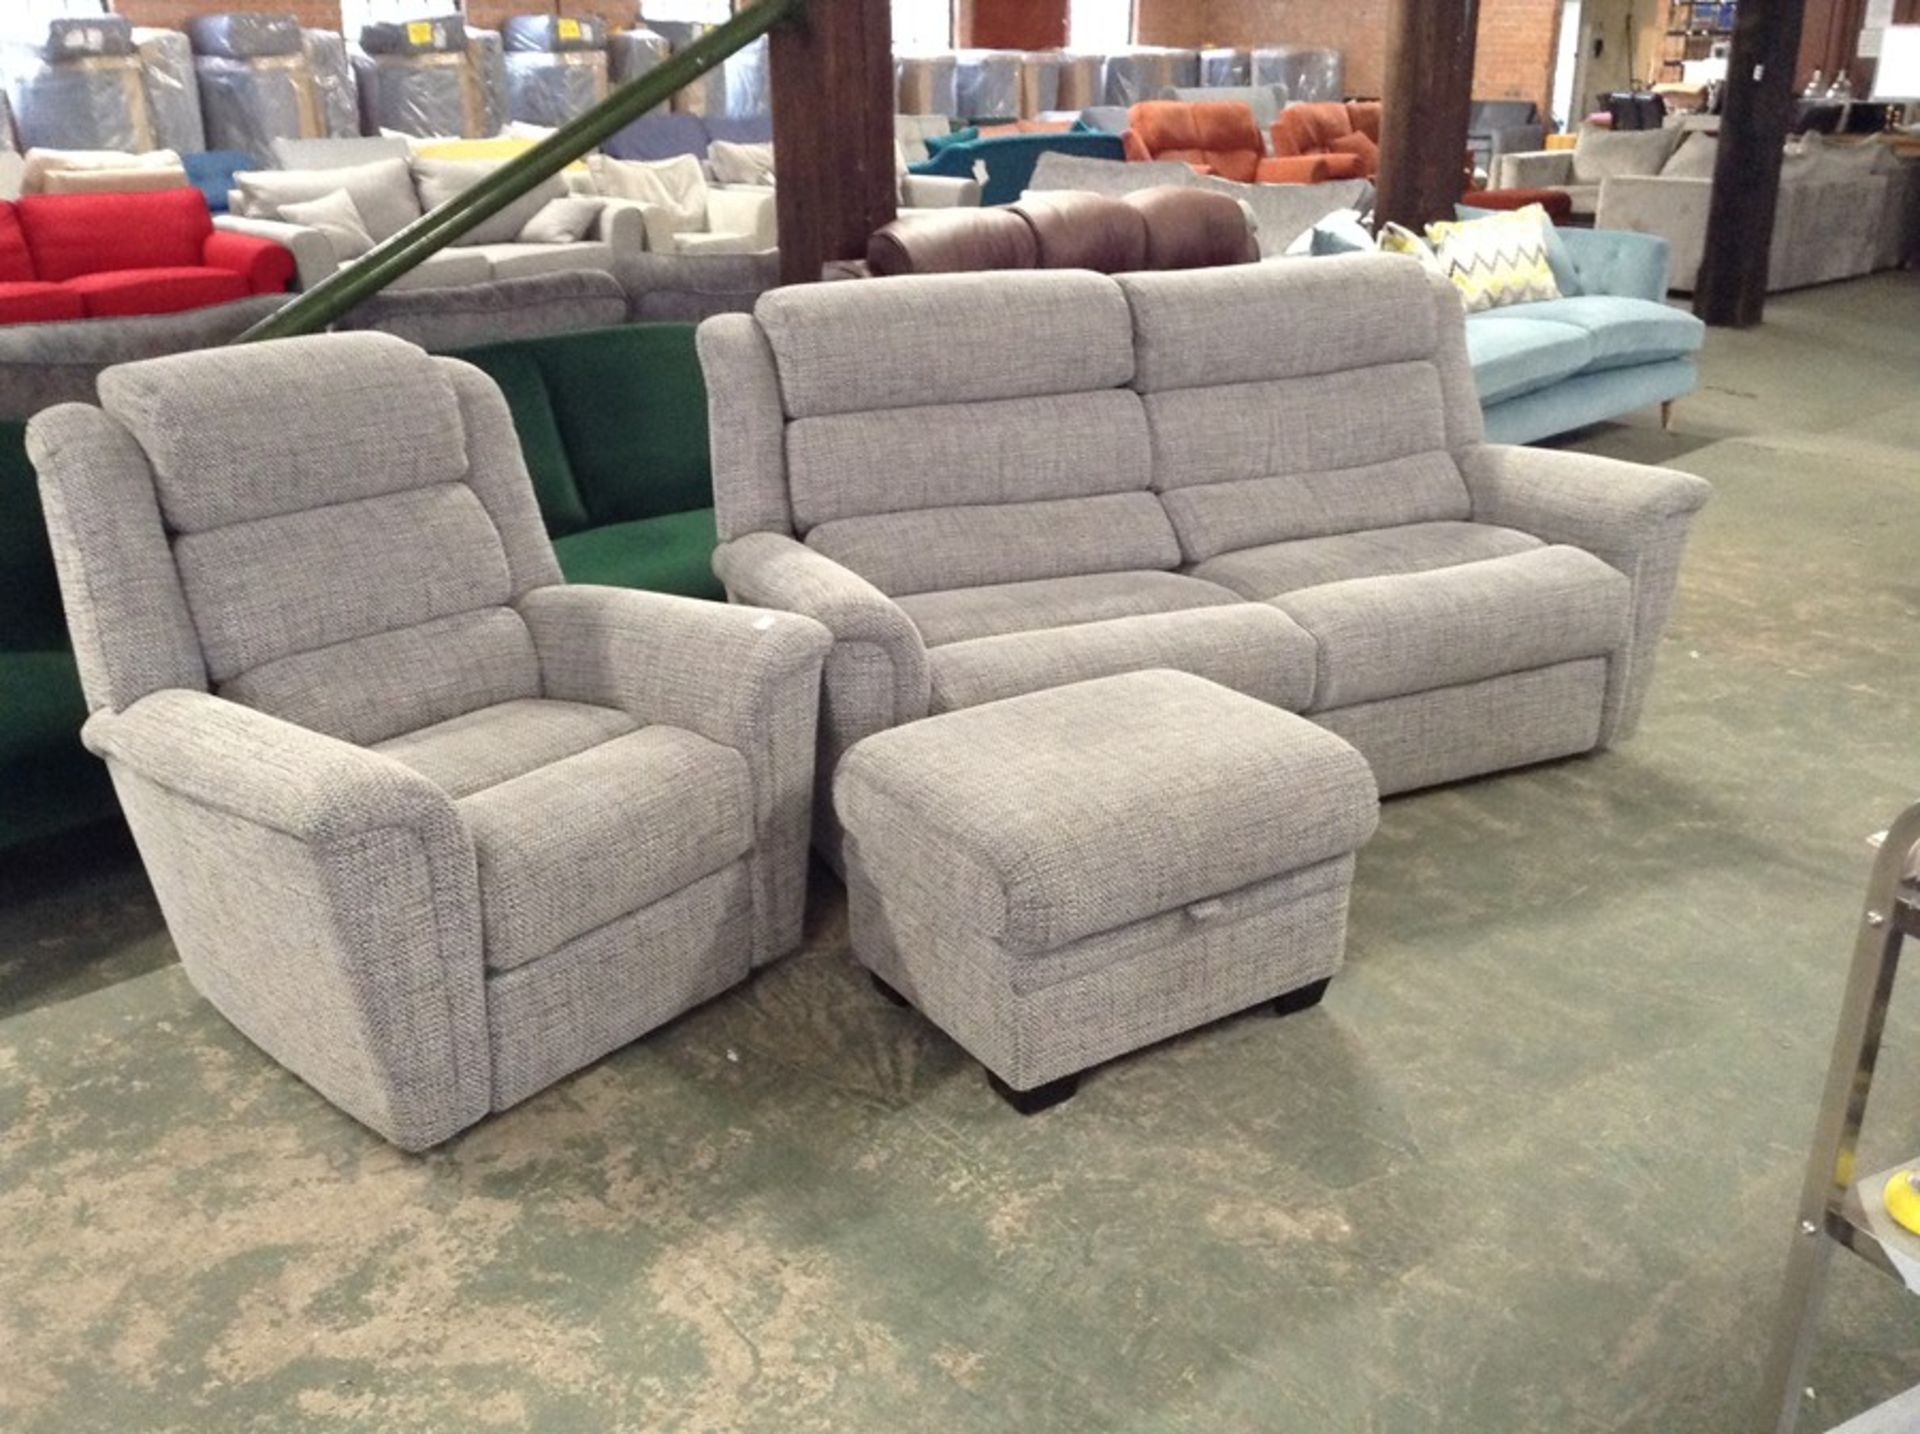 GREY PATTERNED HIGH BACK 3 SEATER SOFA CHAIR AND F